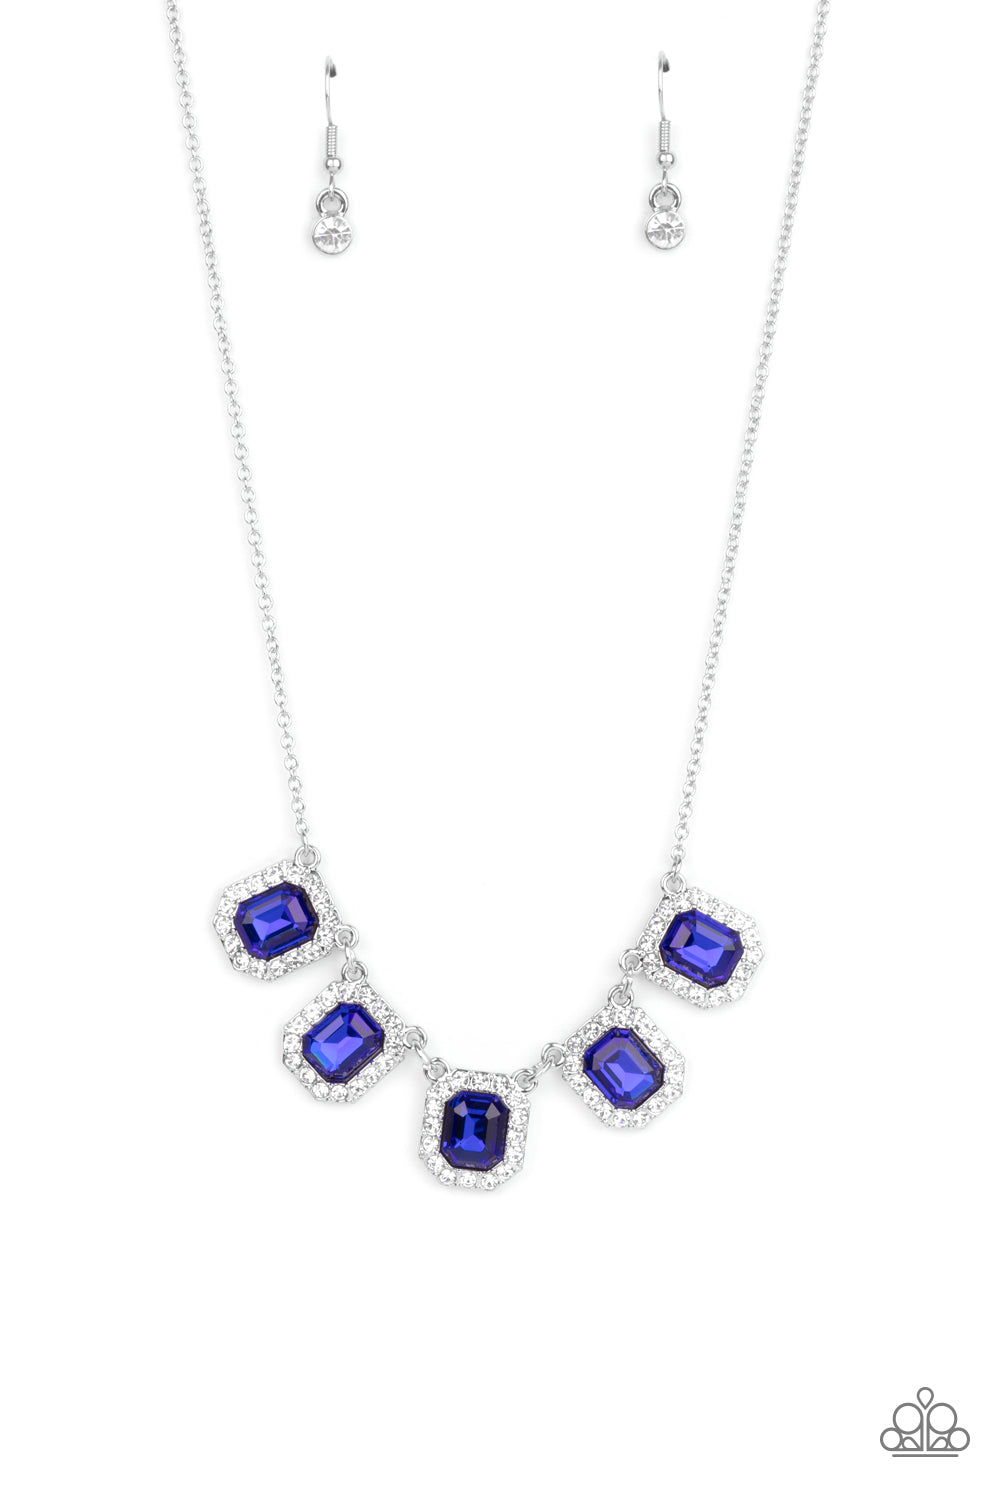 Next Level Luster Necklace (Red, Blue, Green)